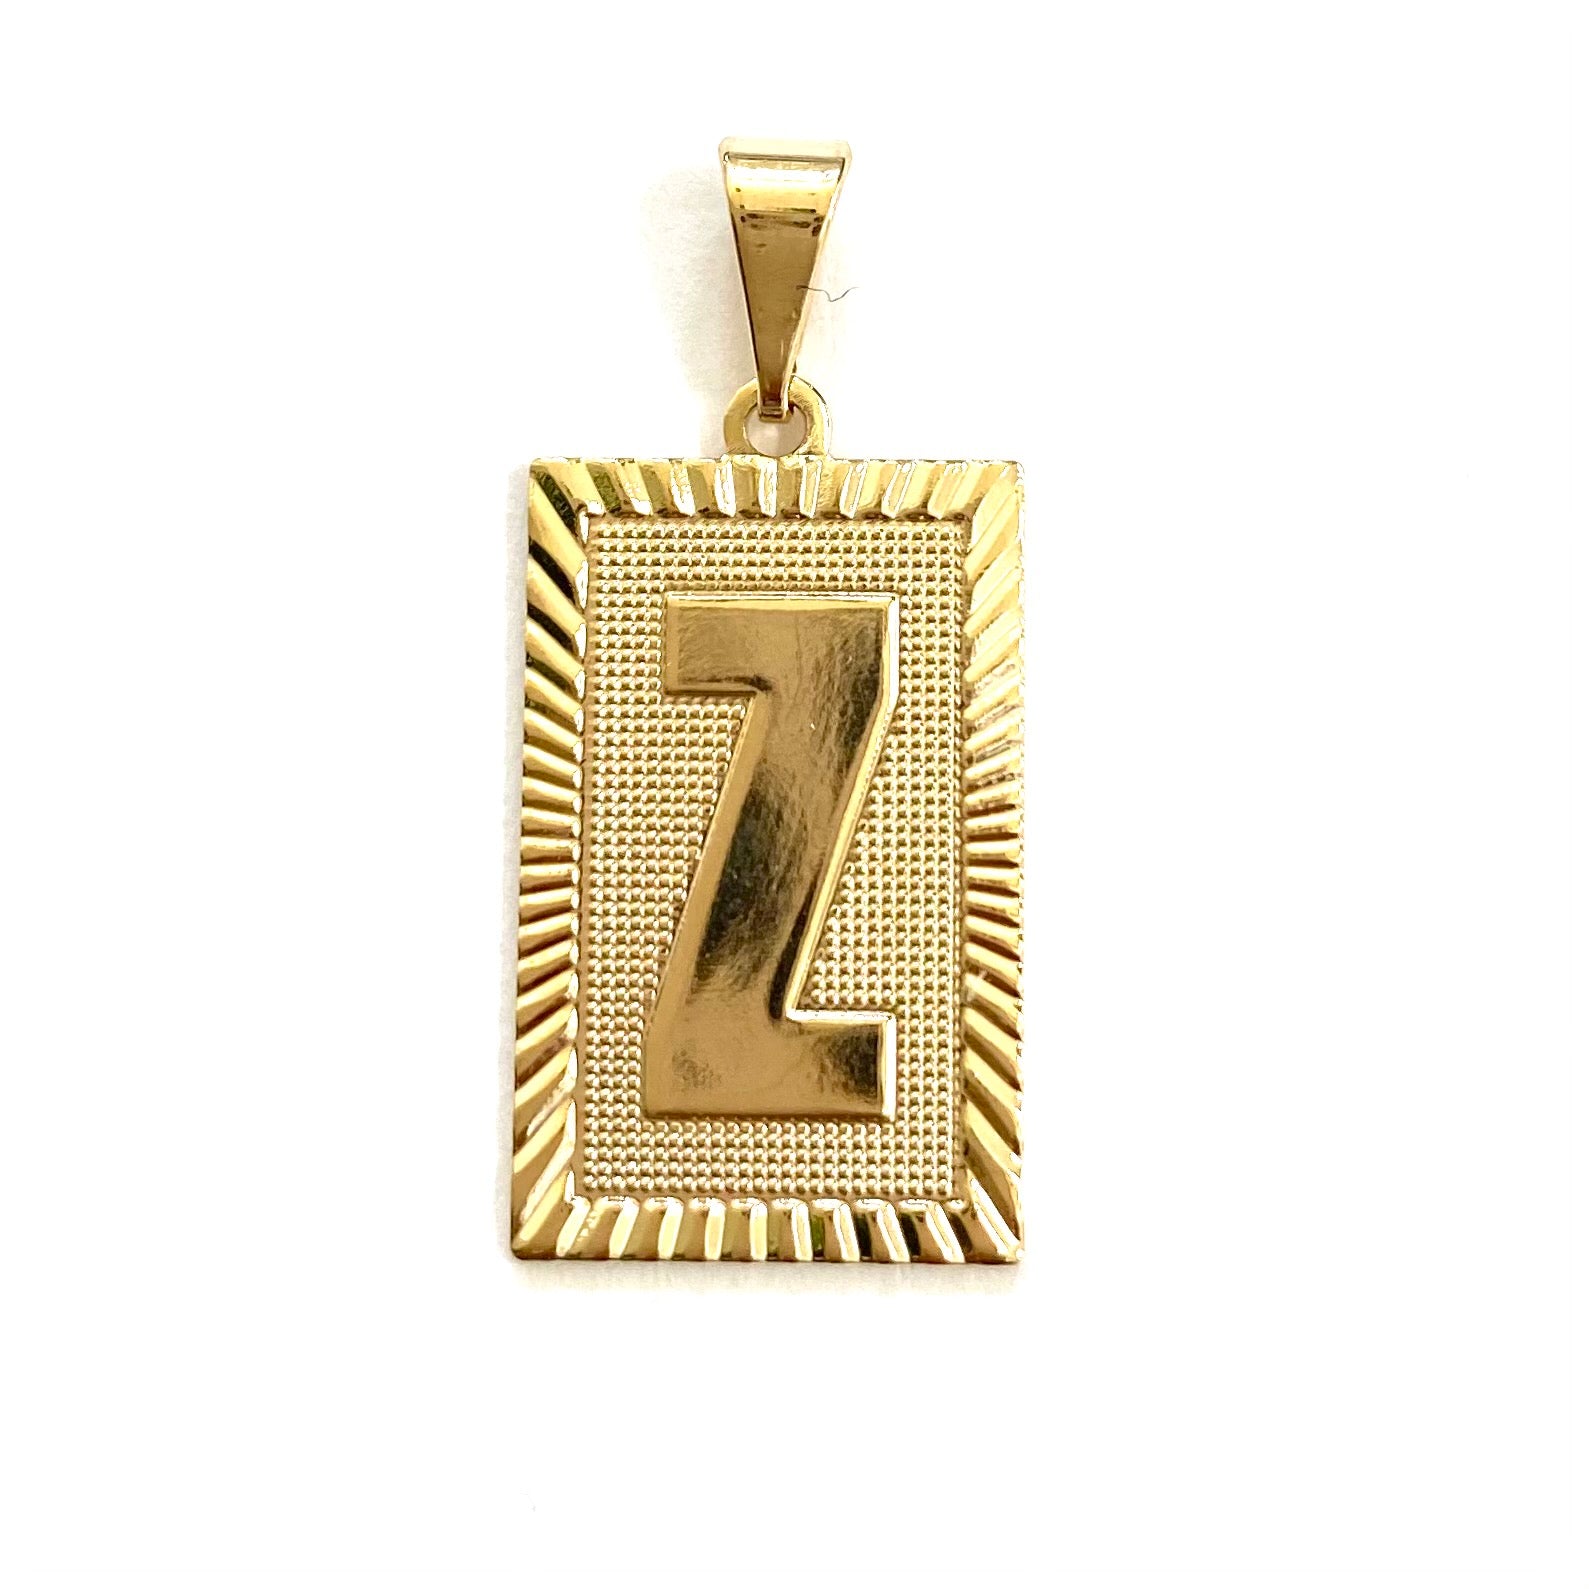 SQUARE initial necklace charm